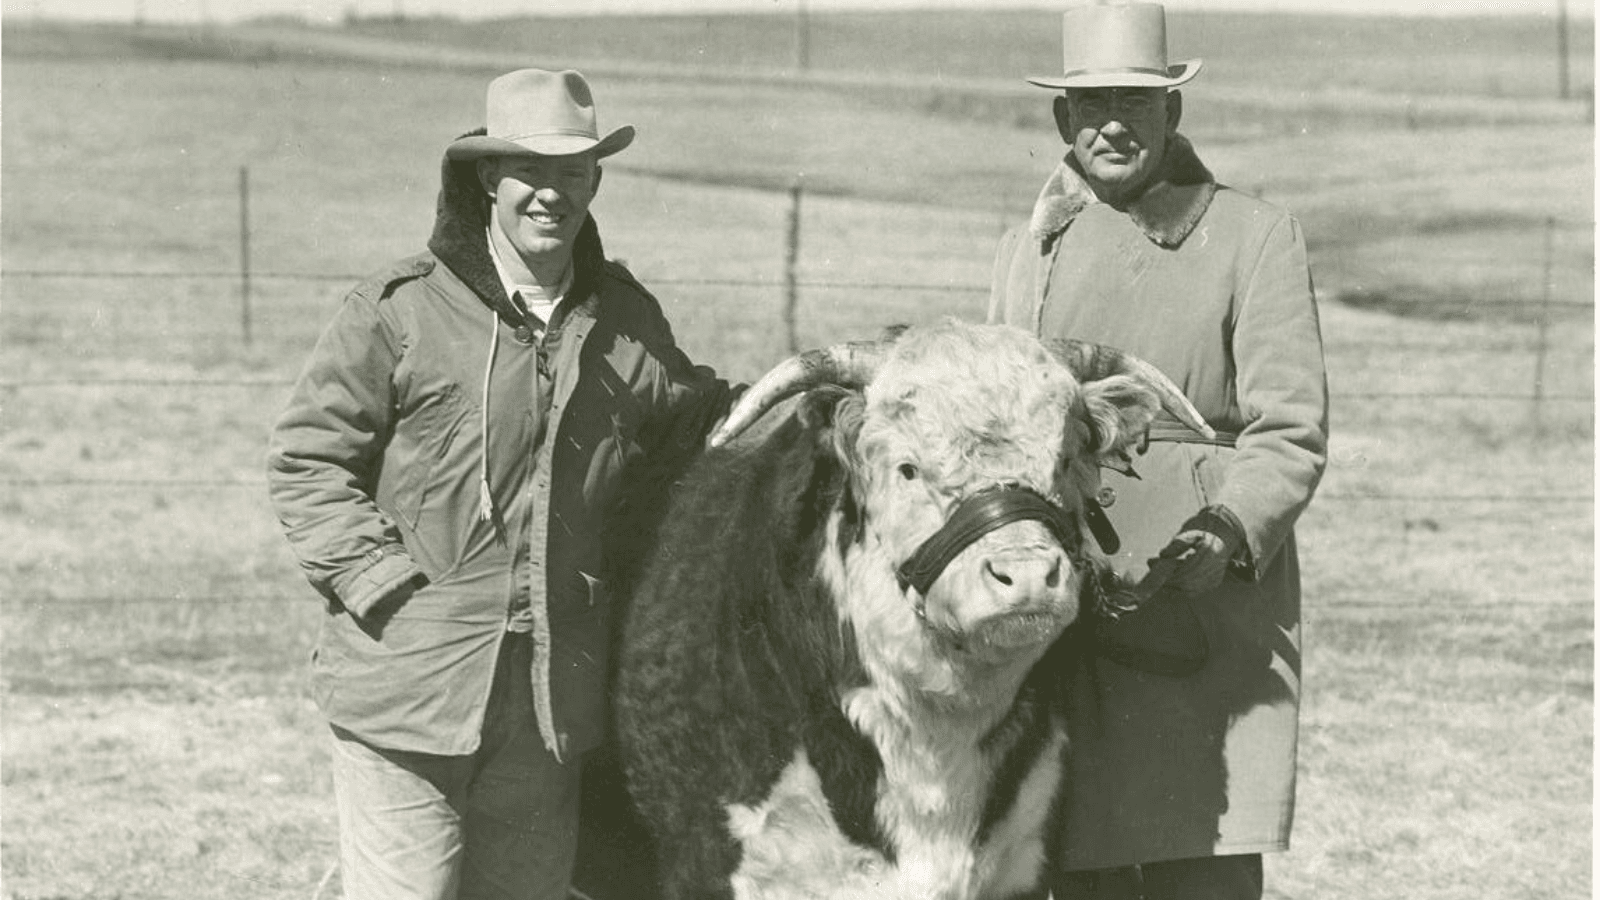 Black and white photo of two farmers standing next to cow